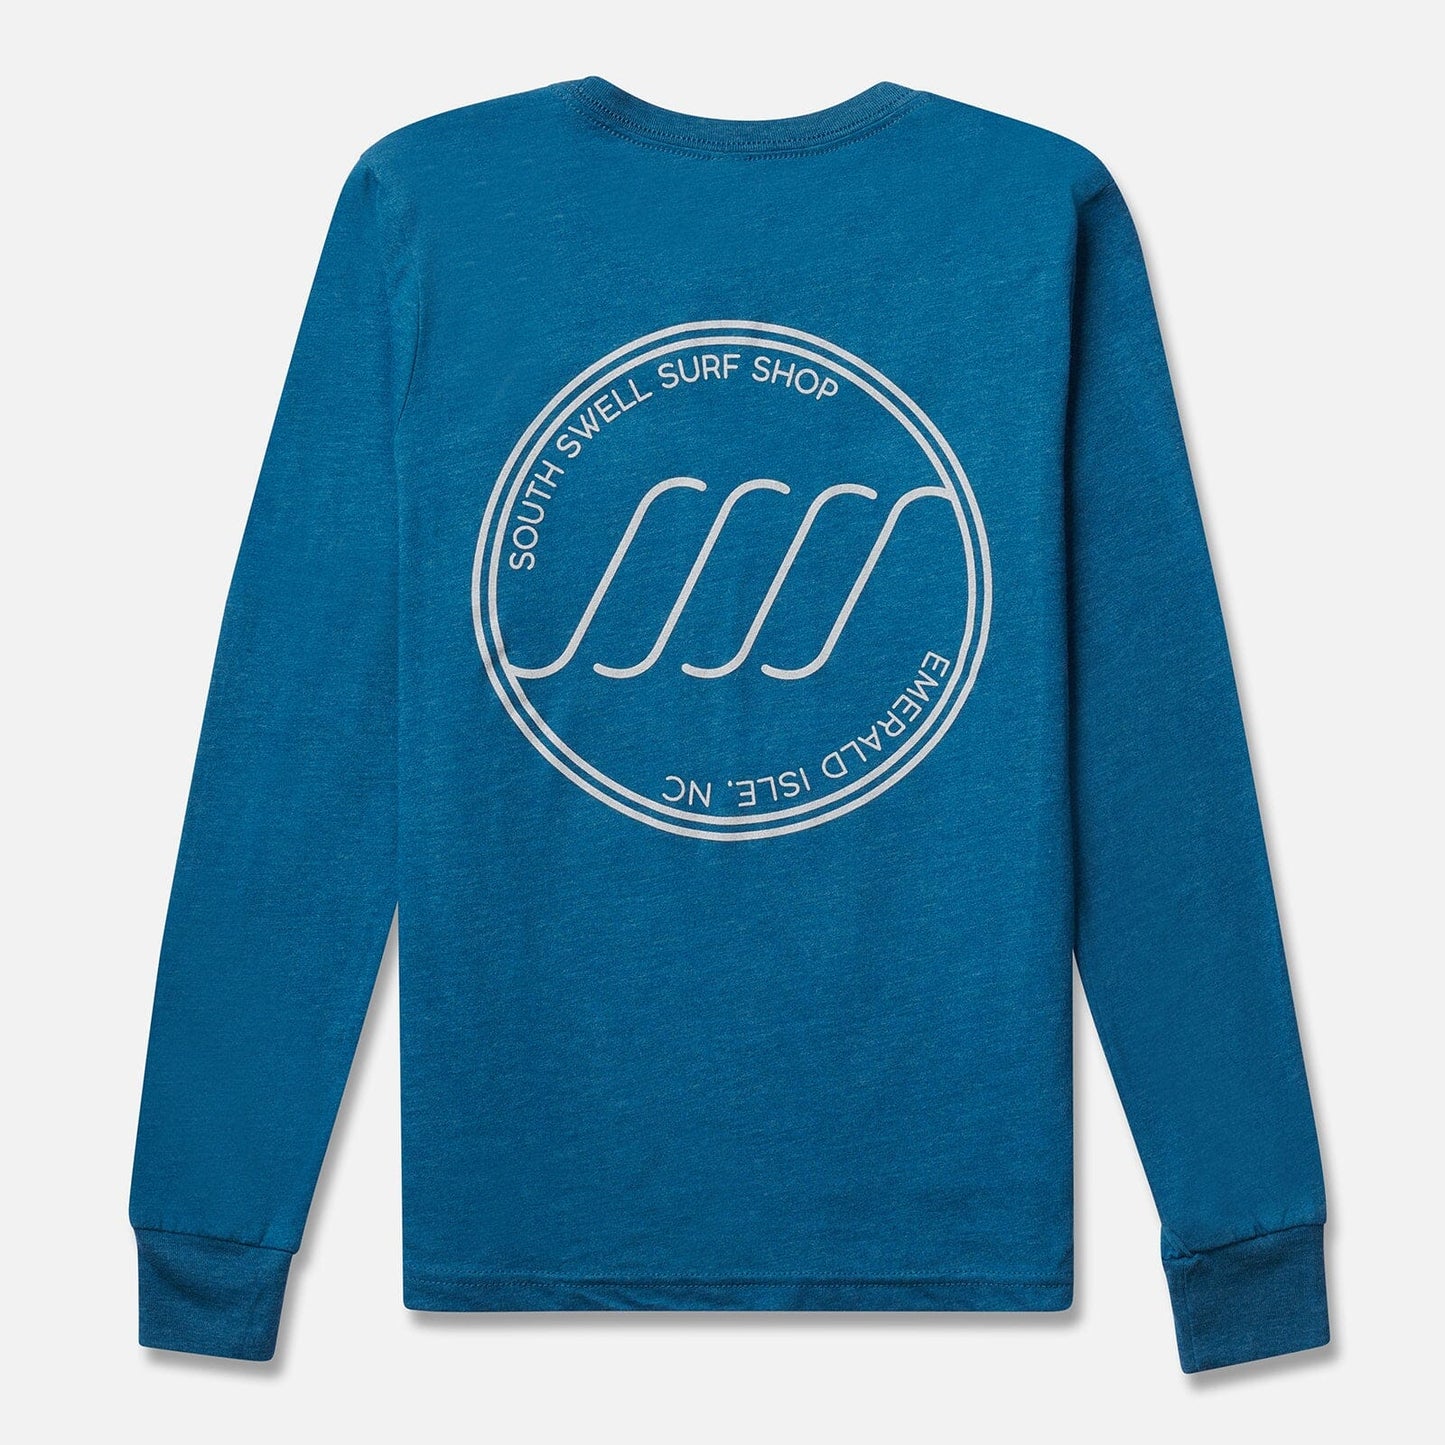 South Swell Youth Circle Longsleeve SOUTH SWELL Teal S 